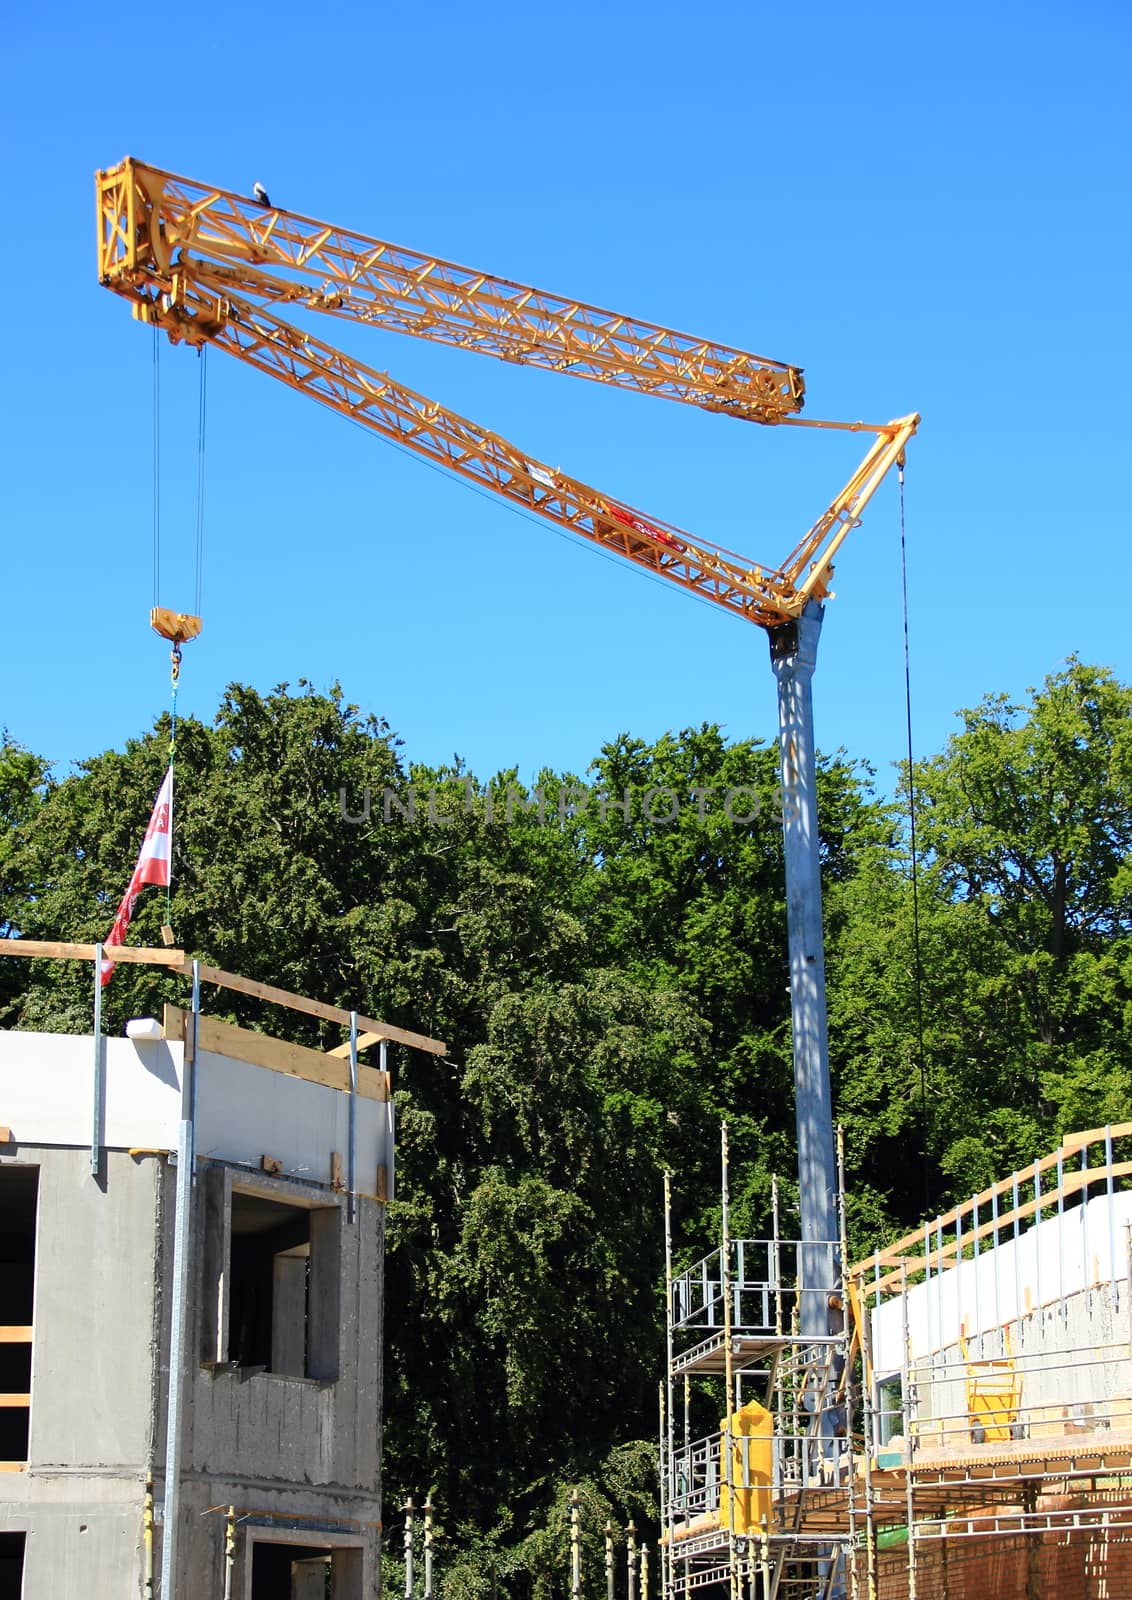 Crane at construction site with blue sky